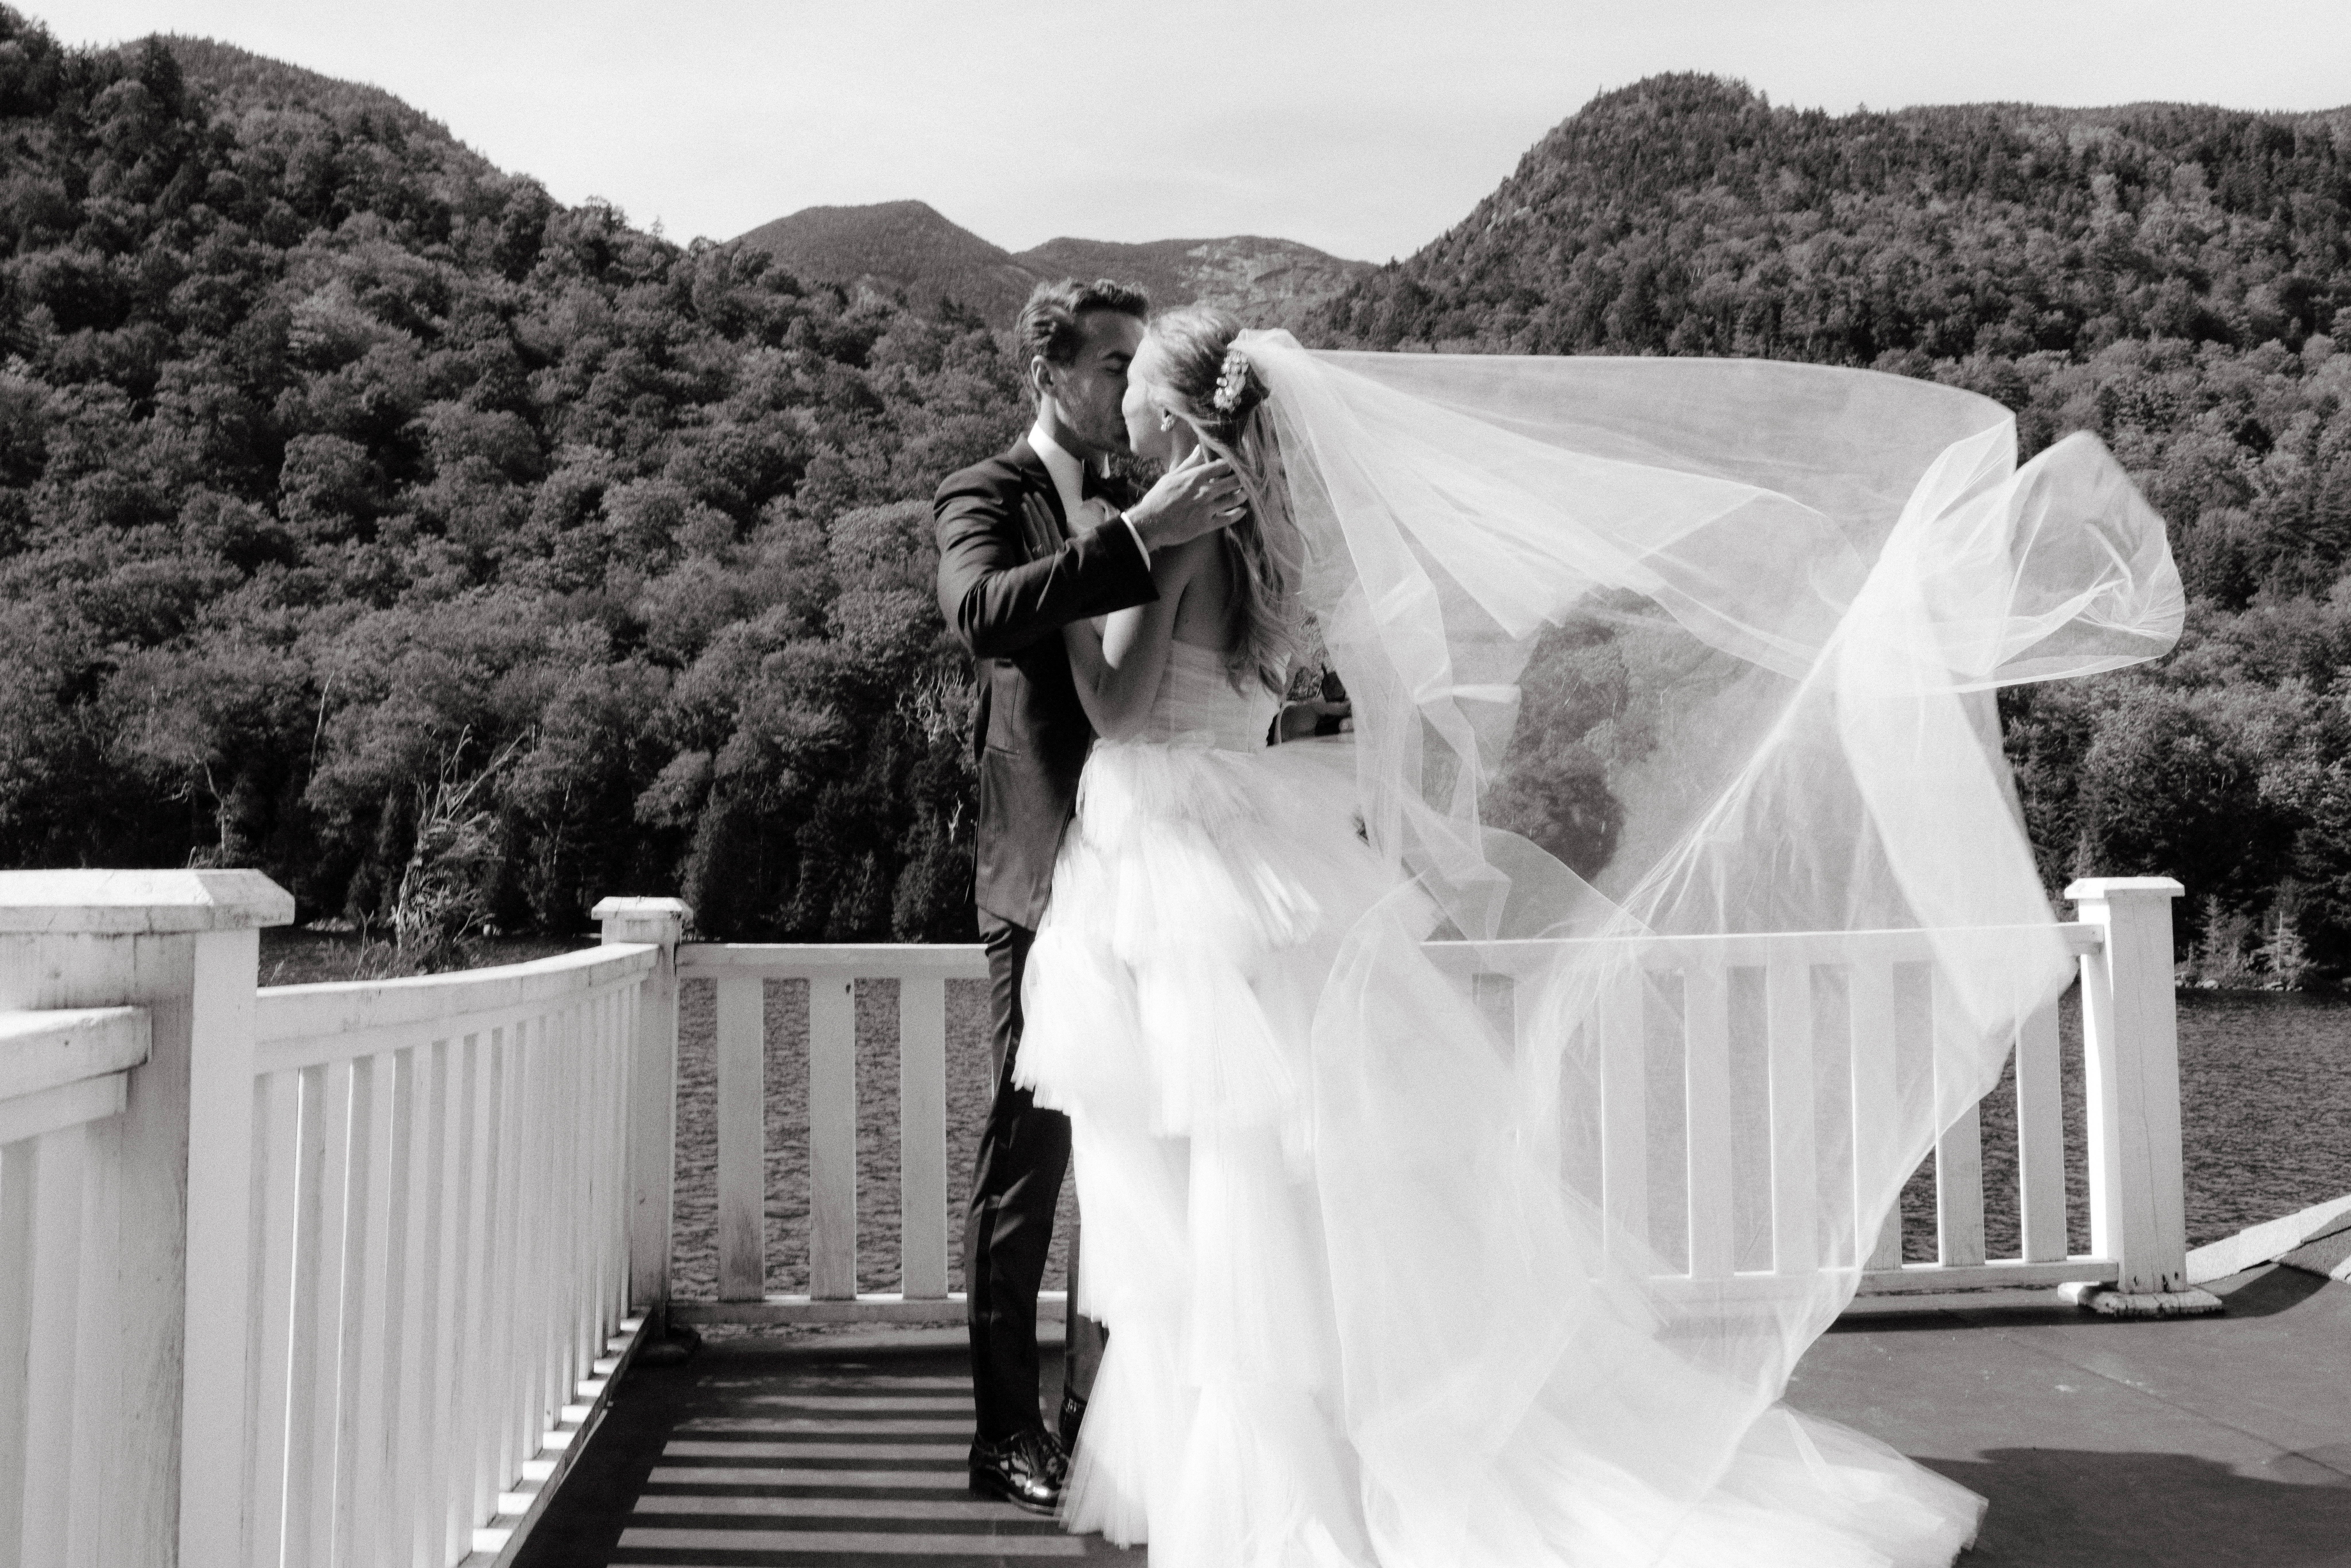 Black and white editorial first look photo in Upstate New York. Heirloom wedding album image by Jenny Fu Studio